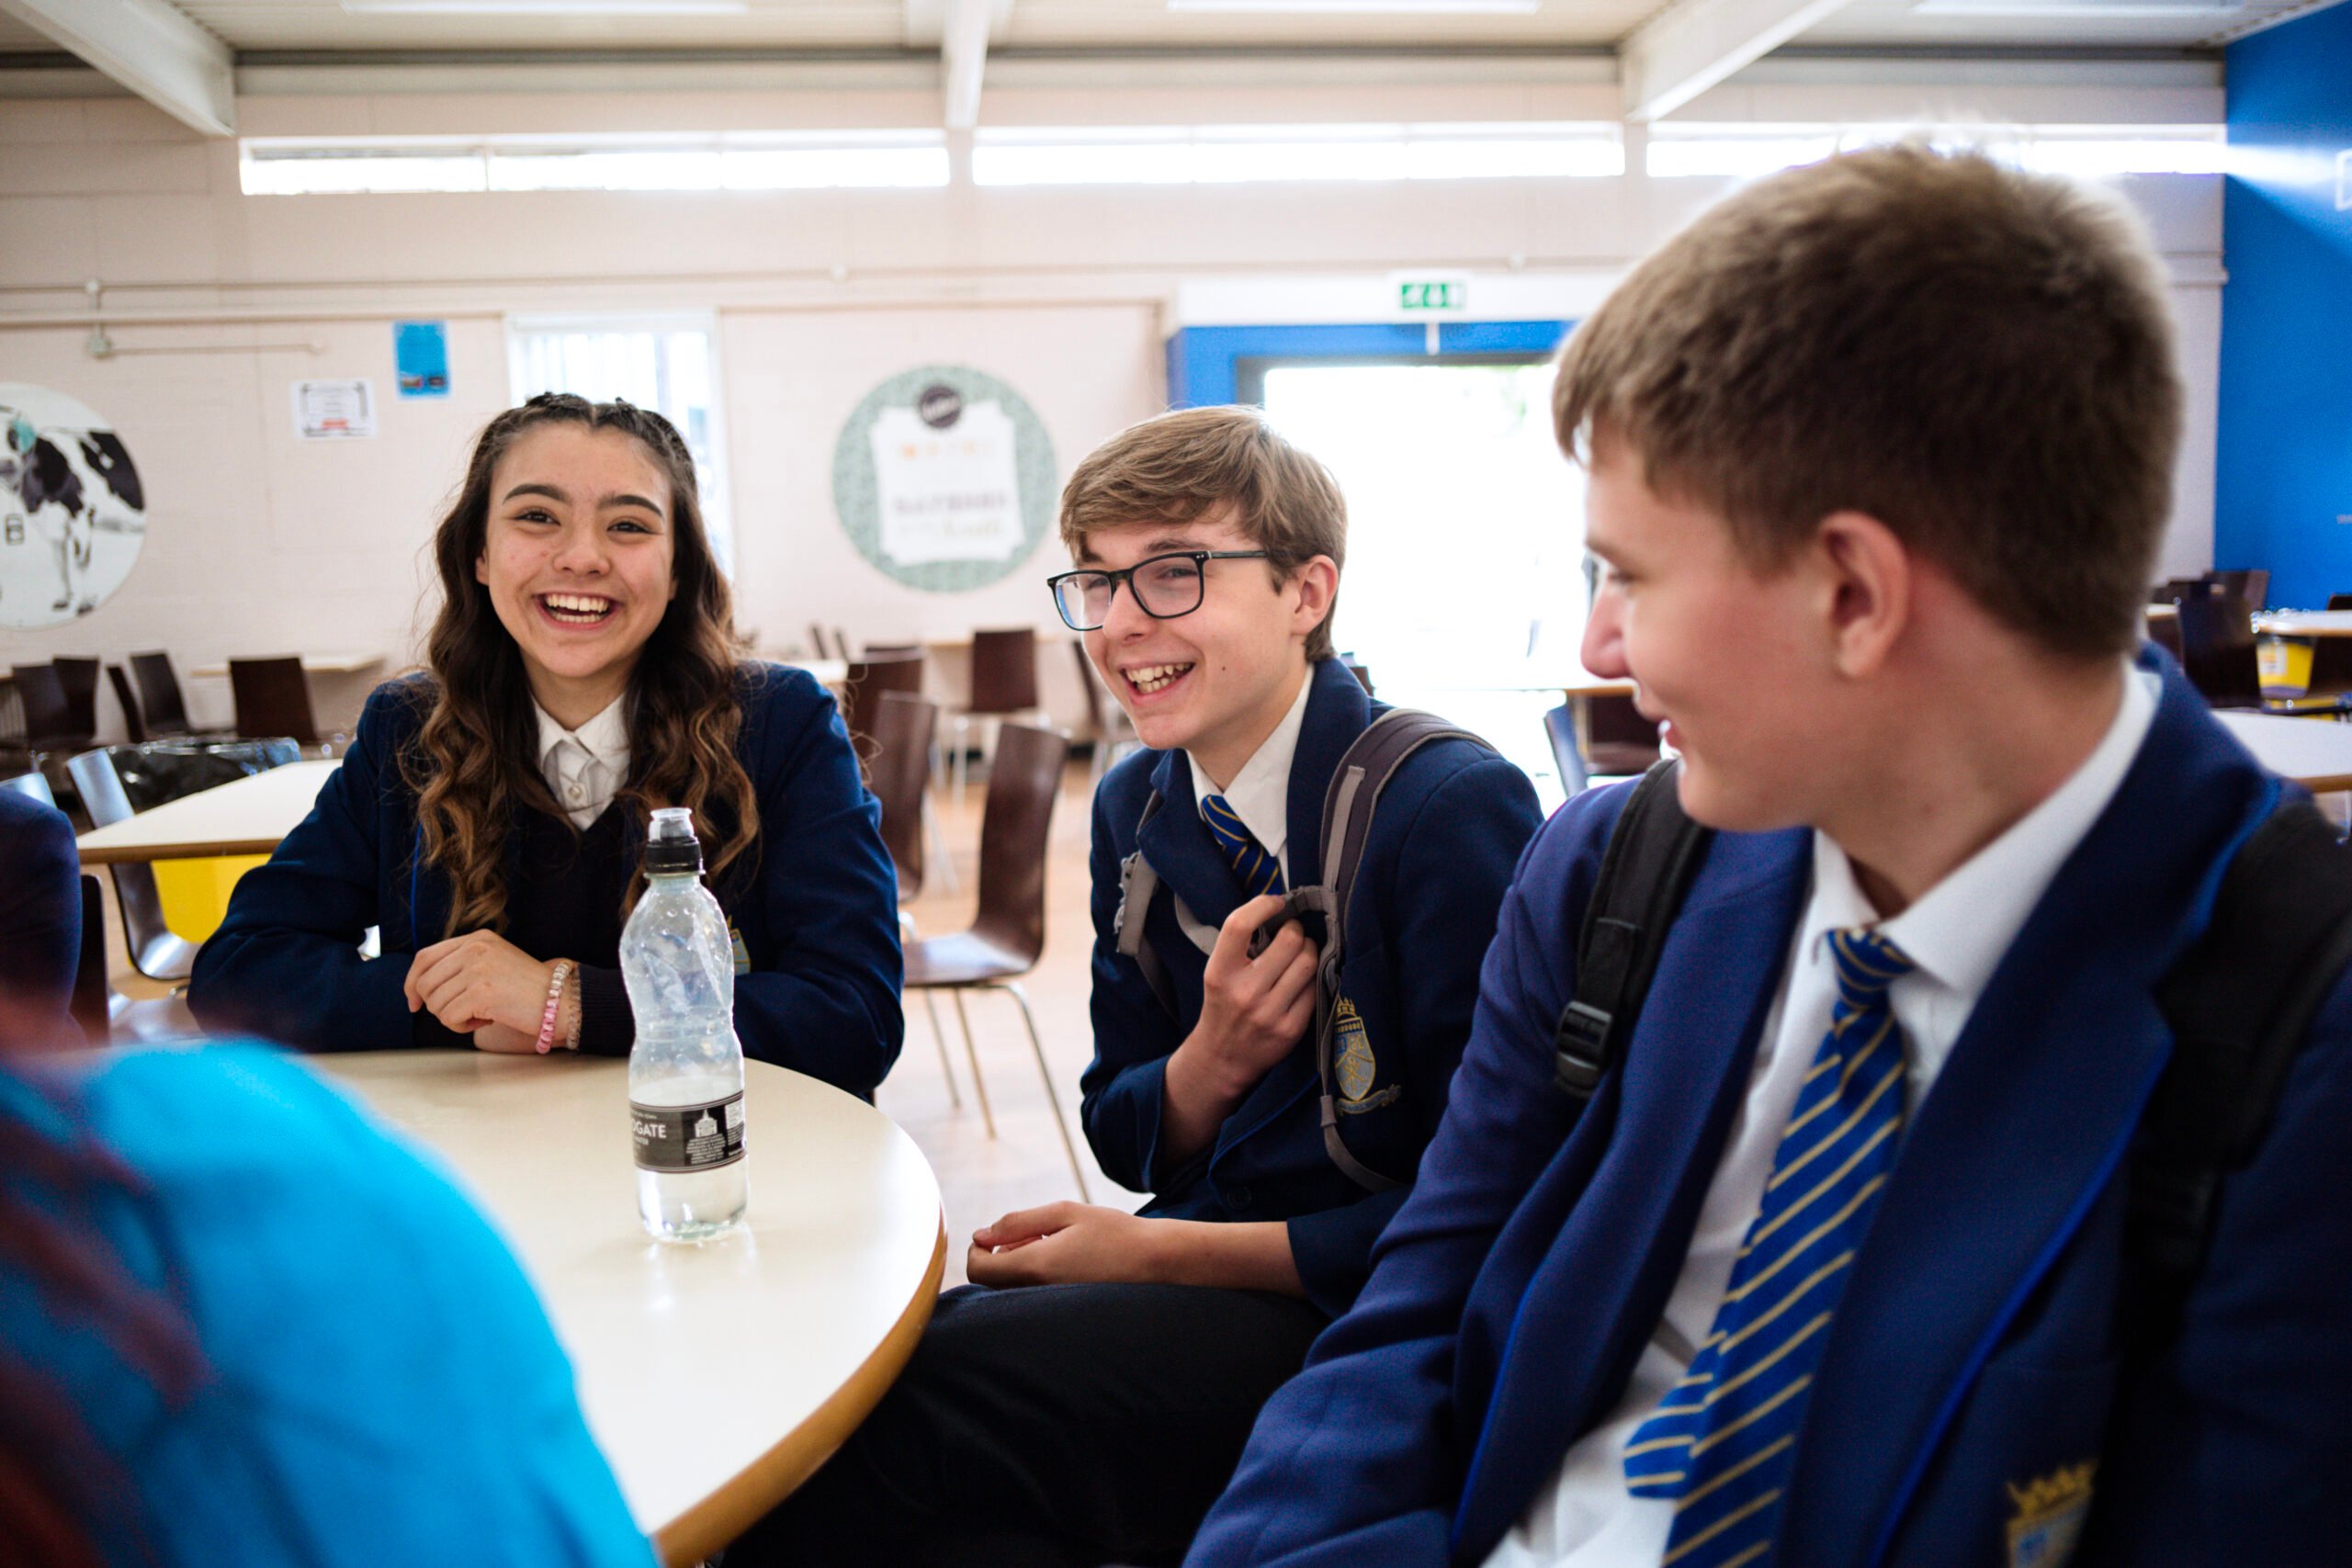 One girl and two boys wearing school uniform sat around a table laughing and smiling